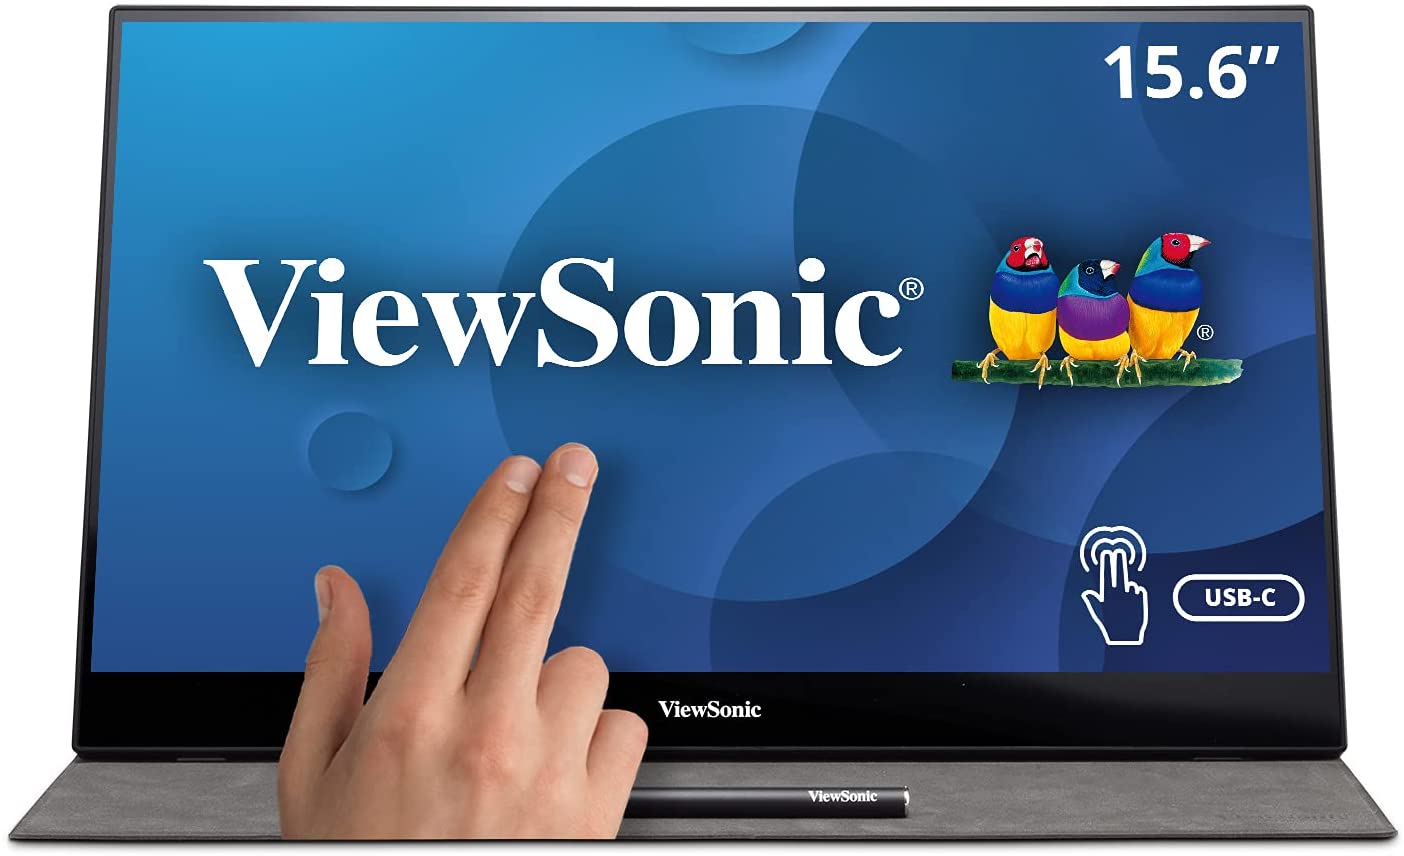 ViewSonic TD1655-S 16" 16:9 Portable Multi-Touch IPS Monitor - Certified Refurbished